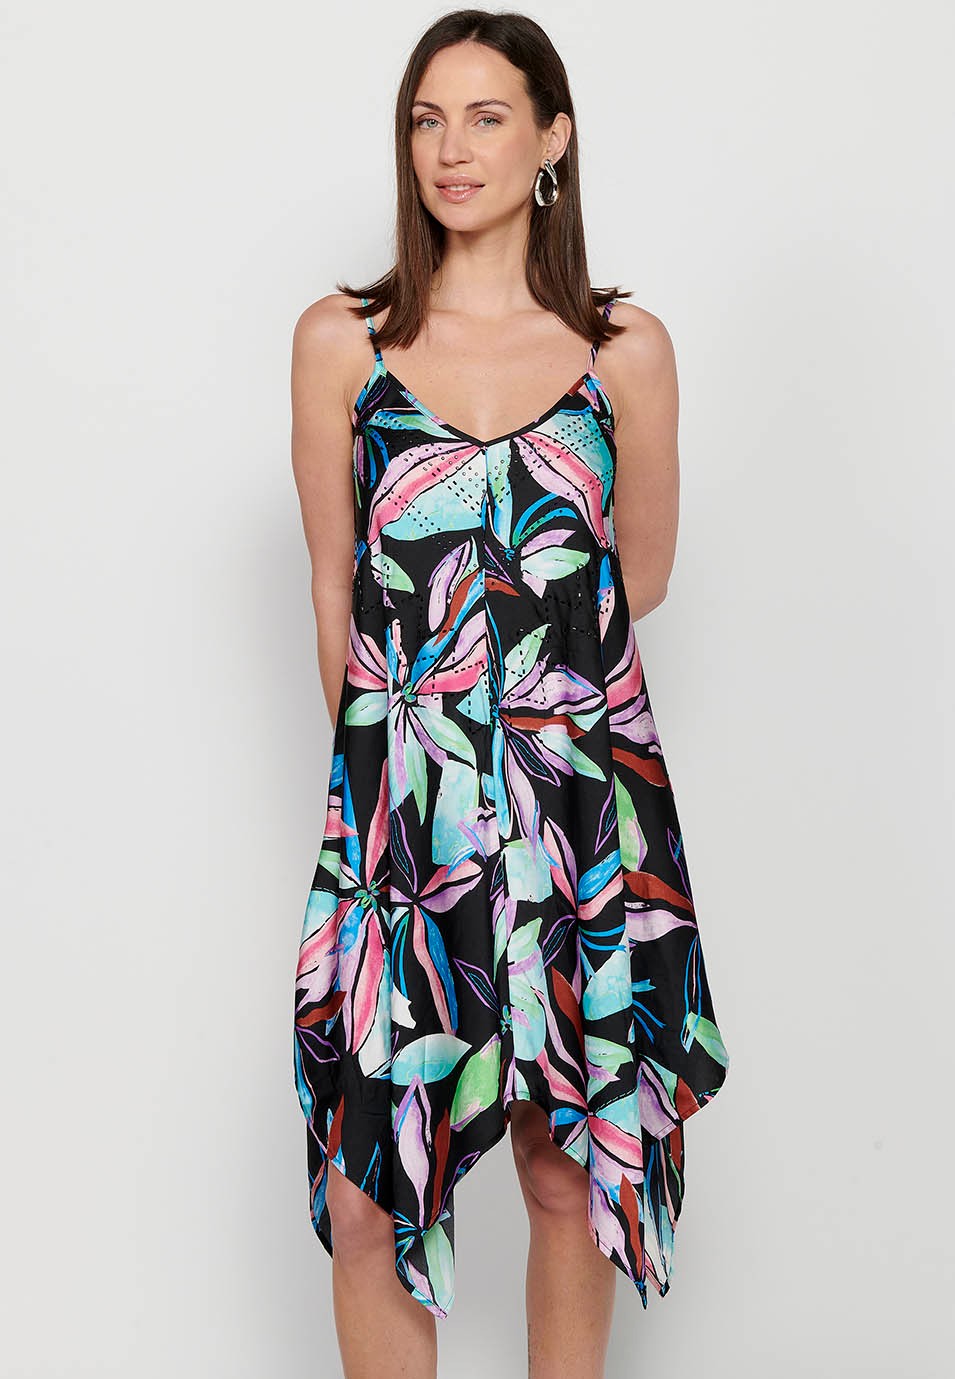 Midi dress with adjustable straps with sparkling neckline and long peaked finish with Multicolor floral print for Women 6